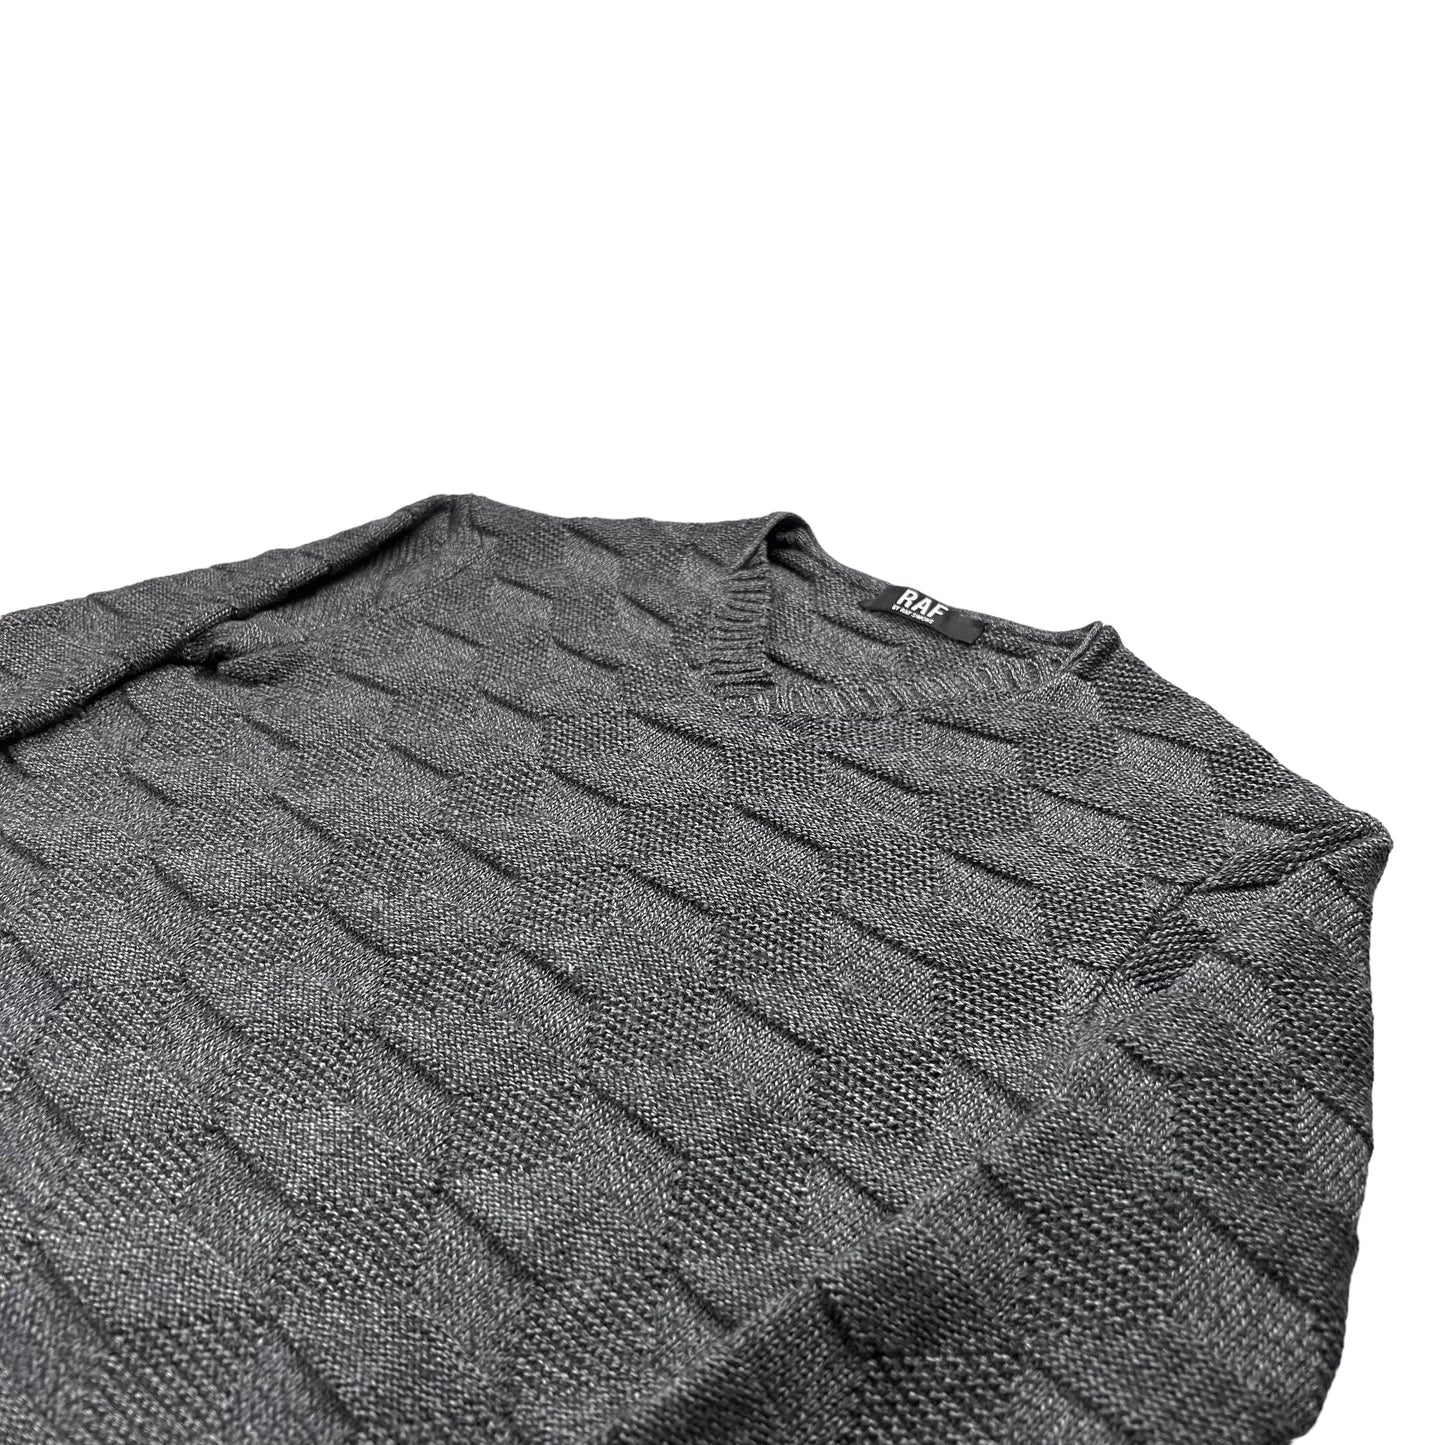 RAF by Raf Simons 3D Textured Knit Sweater